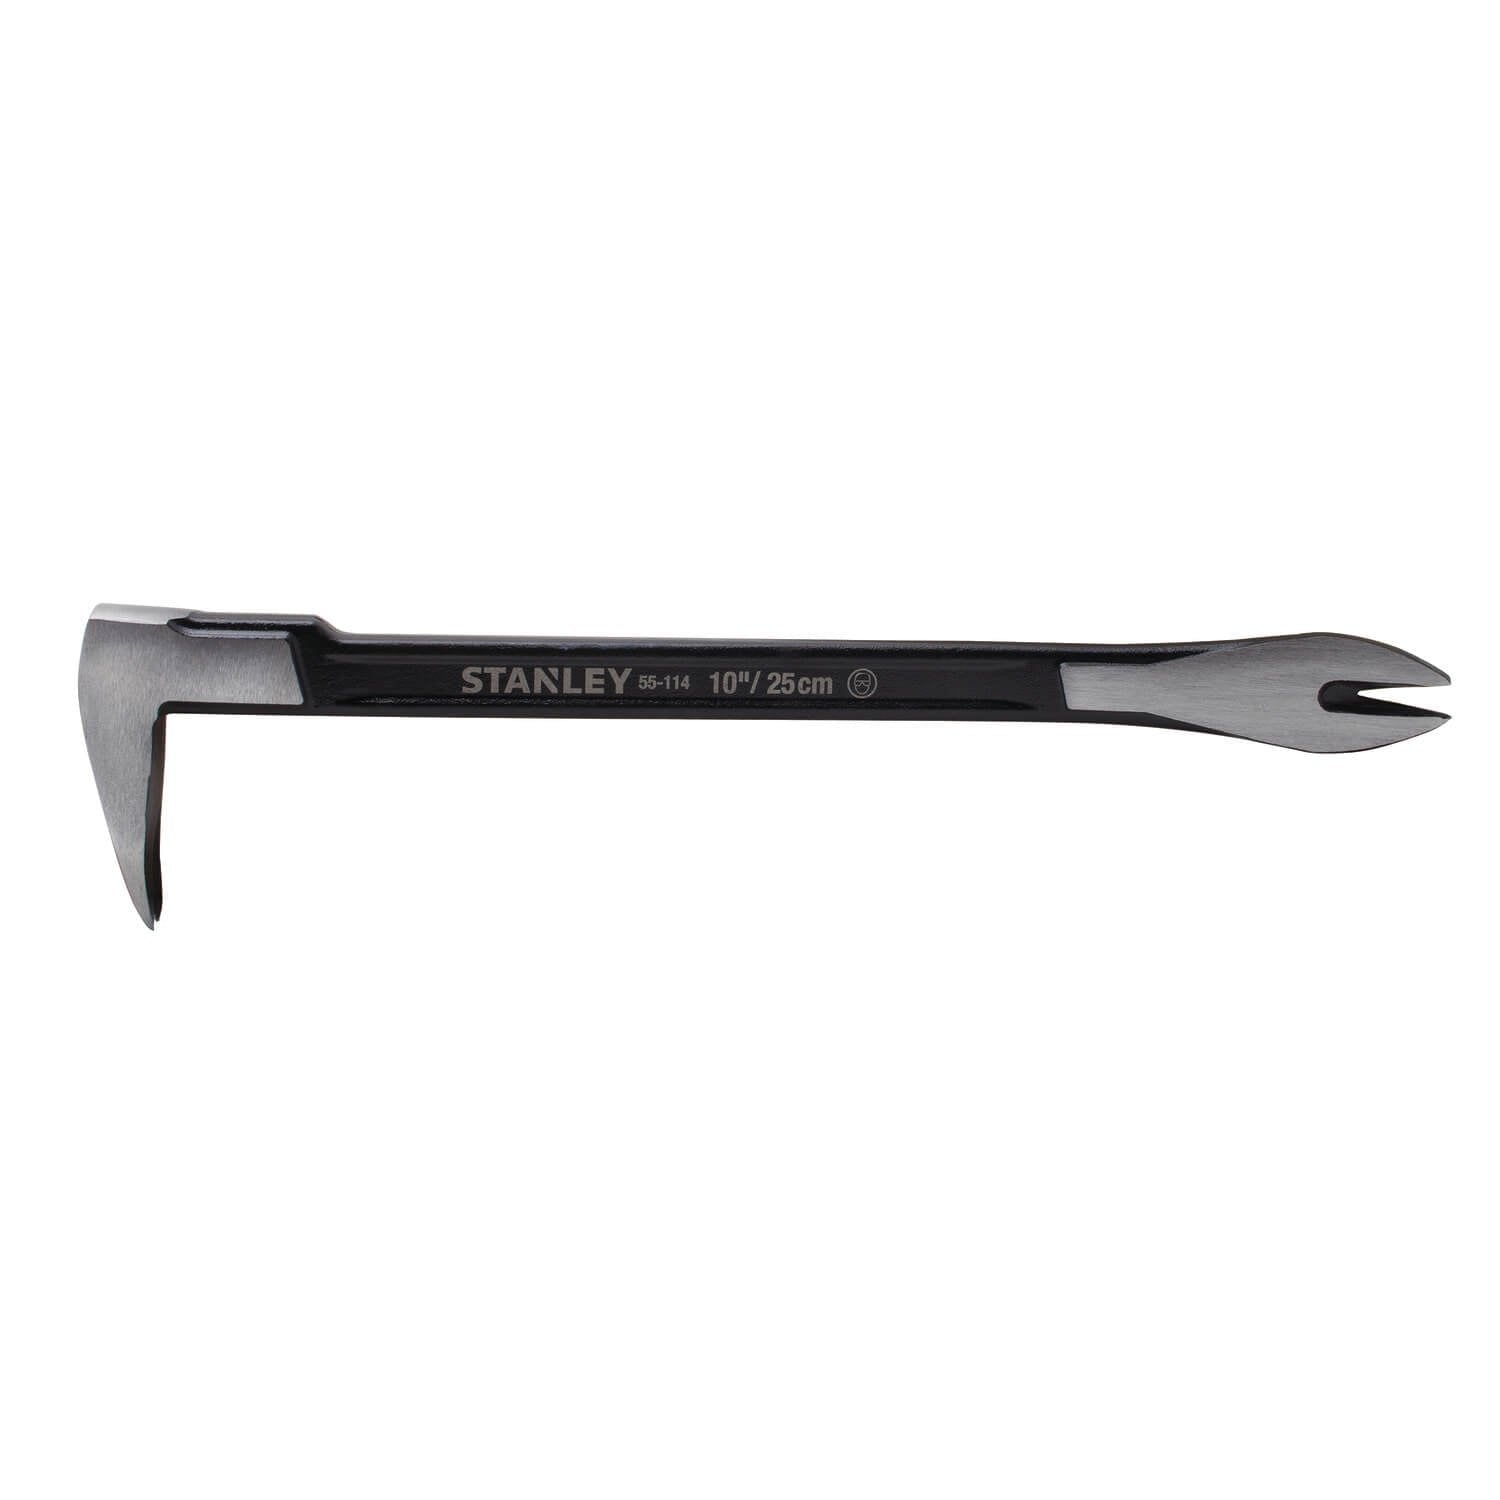 STANLEY  55-114   -  10 IN PRECISION CLAW BAR